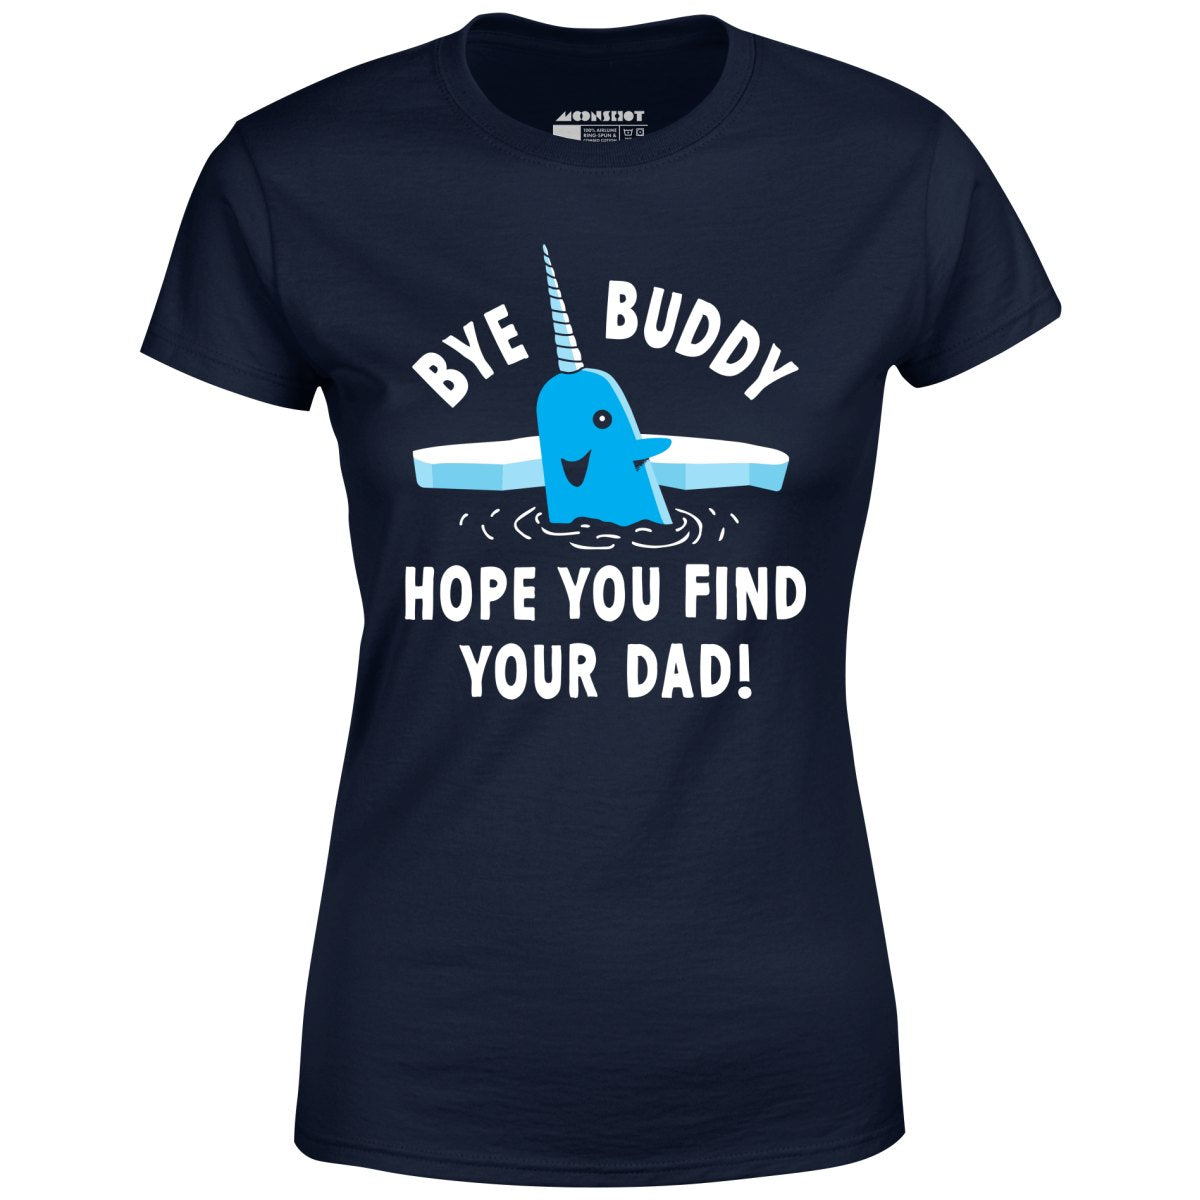 Bye Buddy Hope You Find Your Dad - Women's T-Shirt